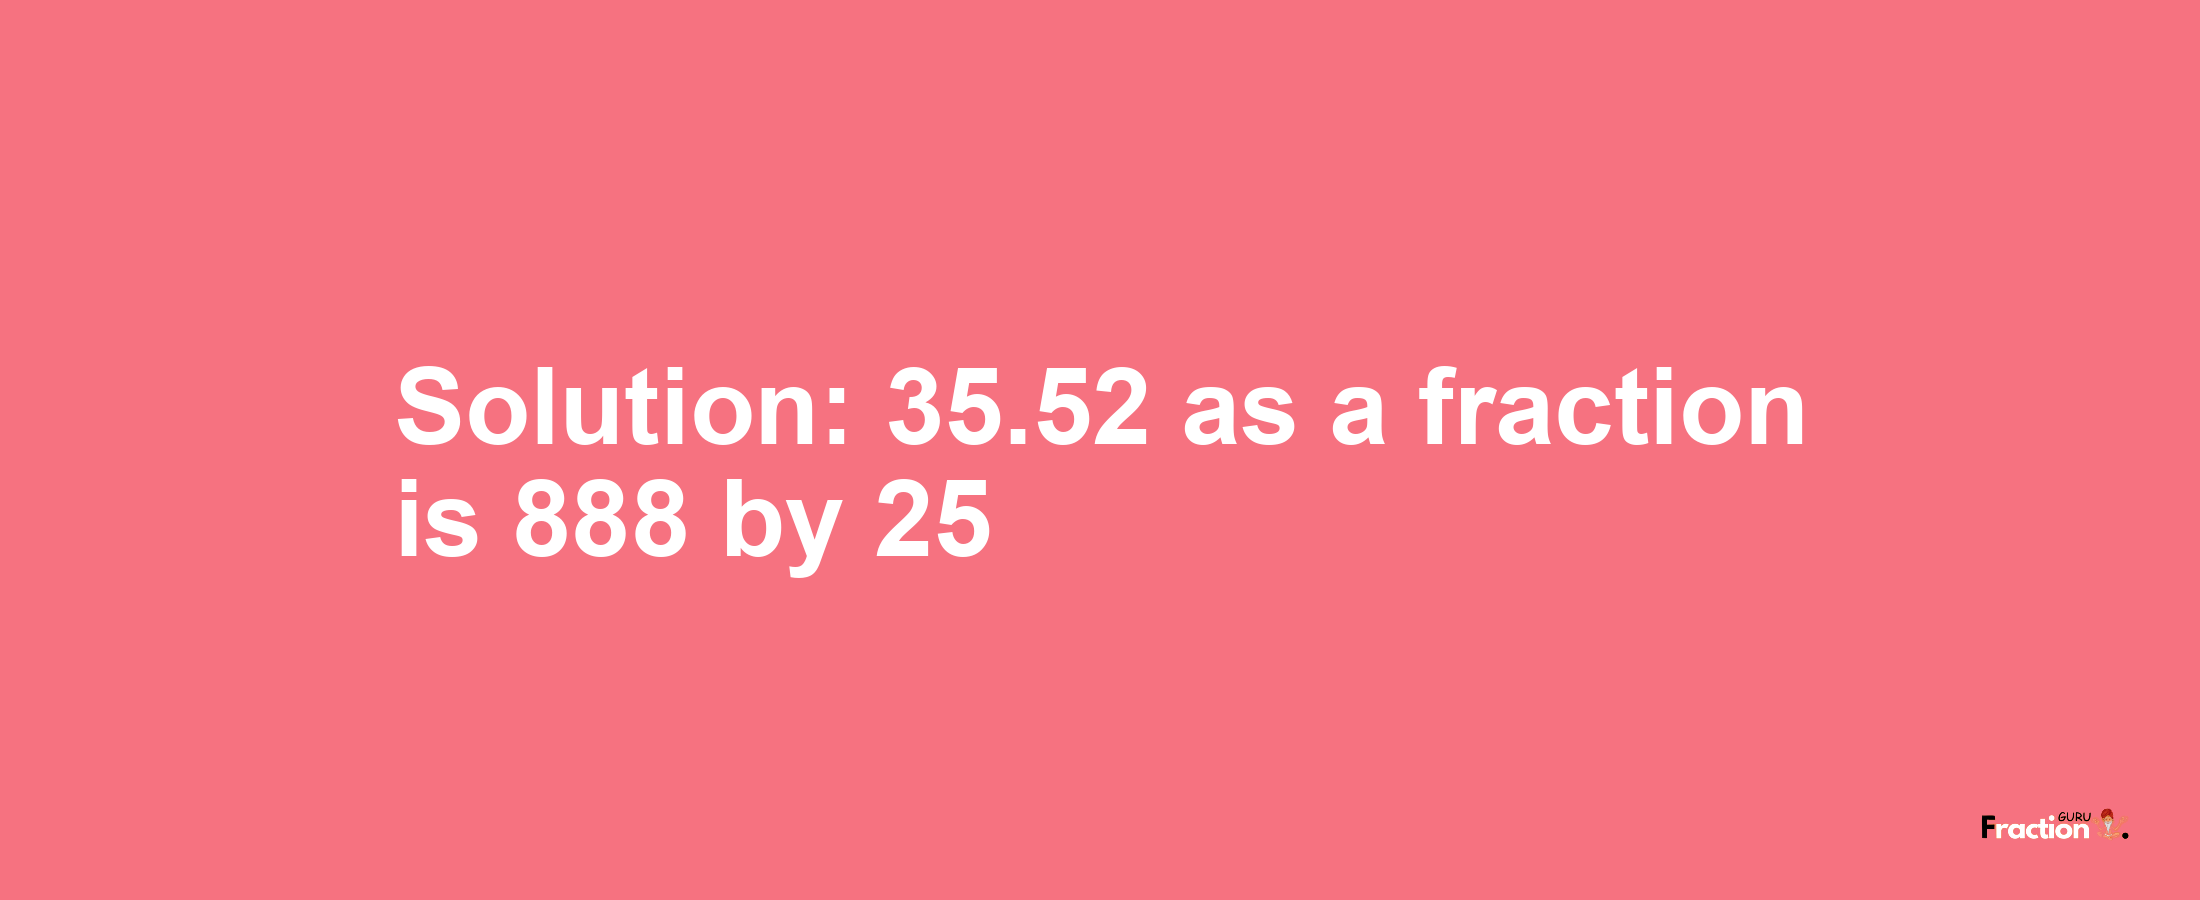 Solution:35.52 as a fraction is 888/25